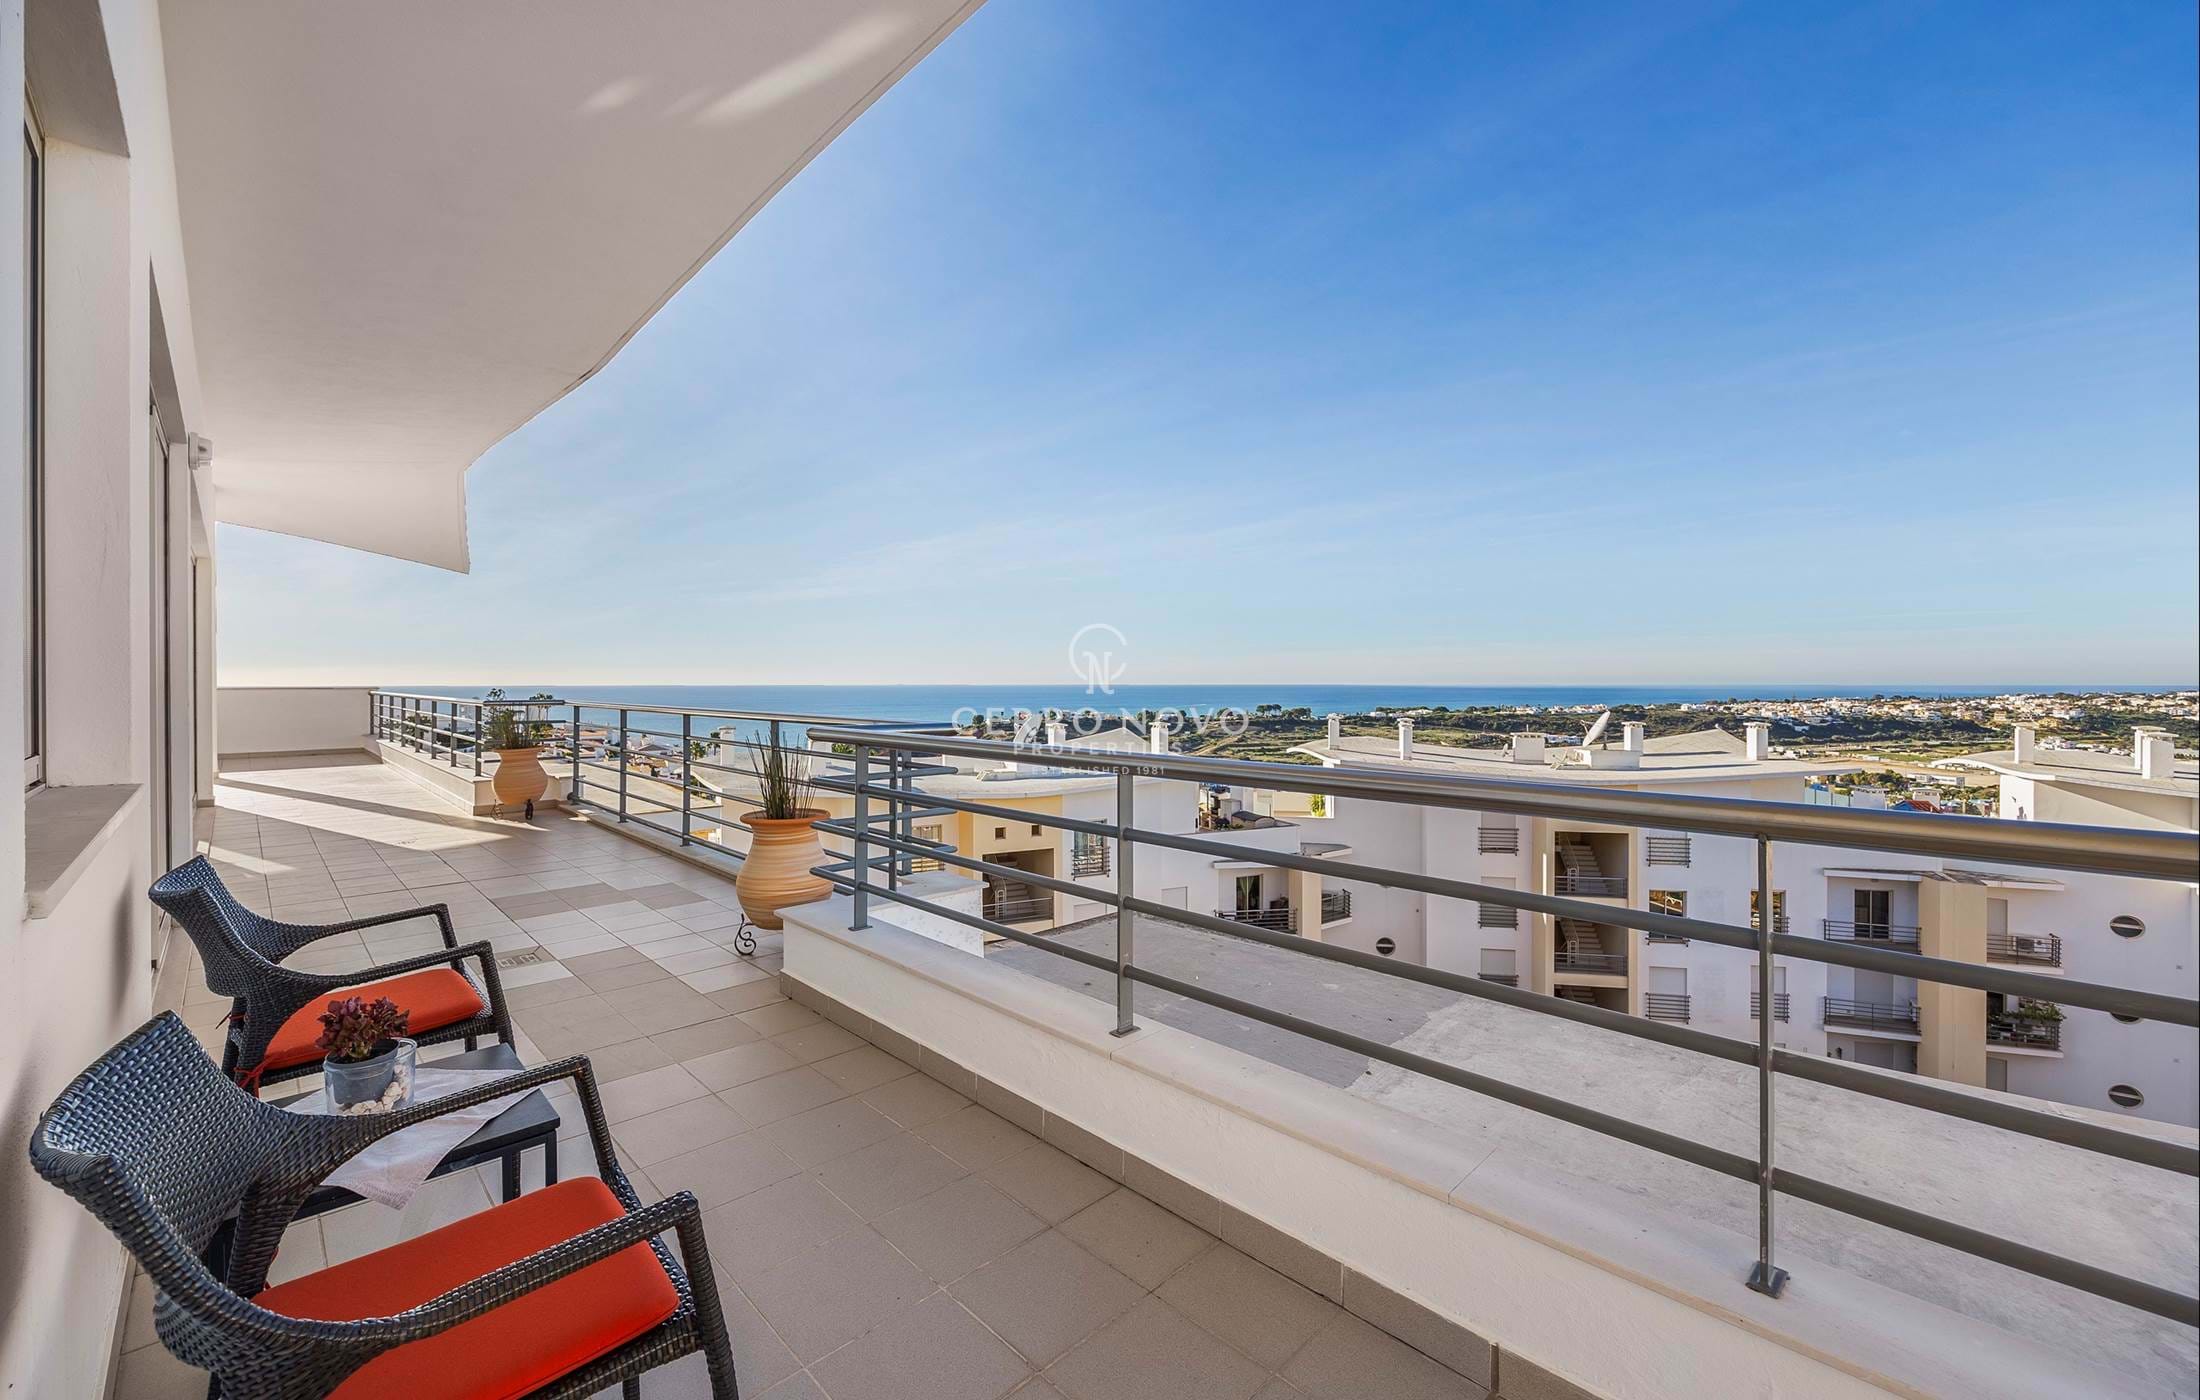 Seaview penthouse close to Albufeira's old town